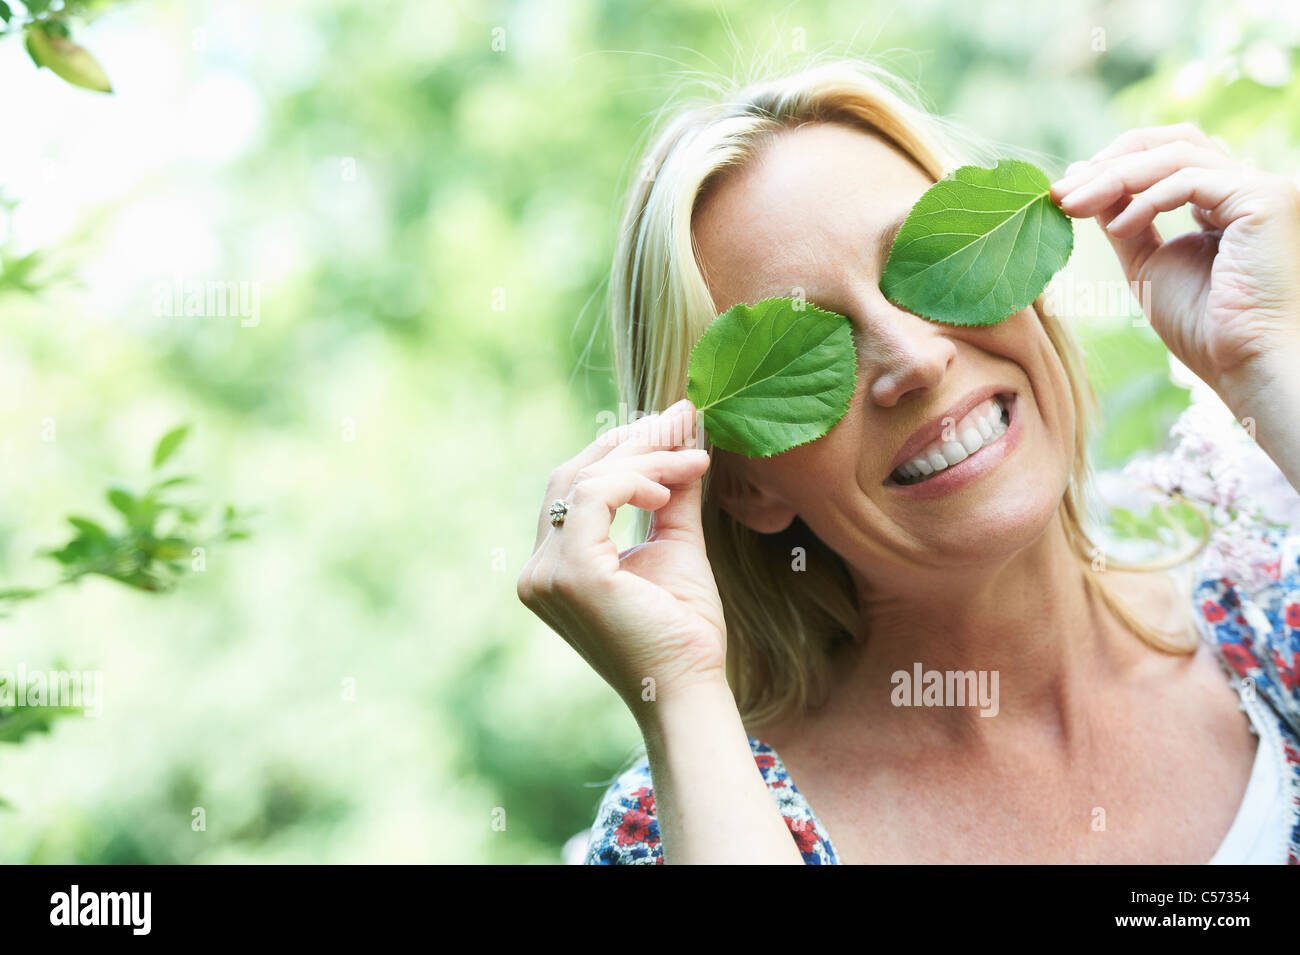 Smiling woman Playing with leaves Banque D'Images